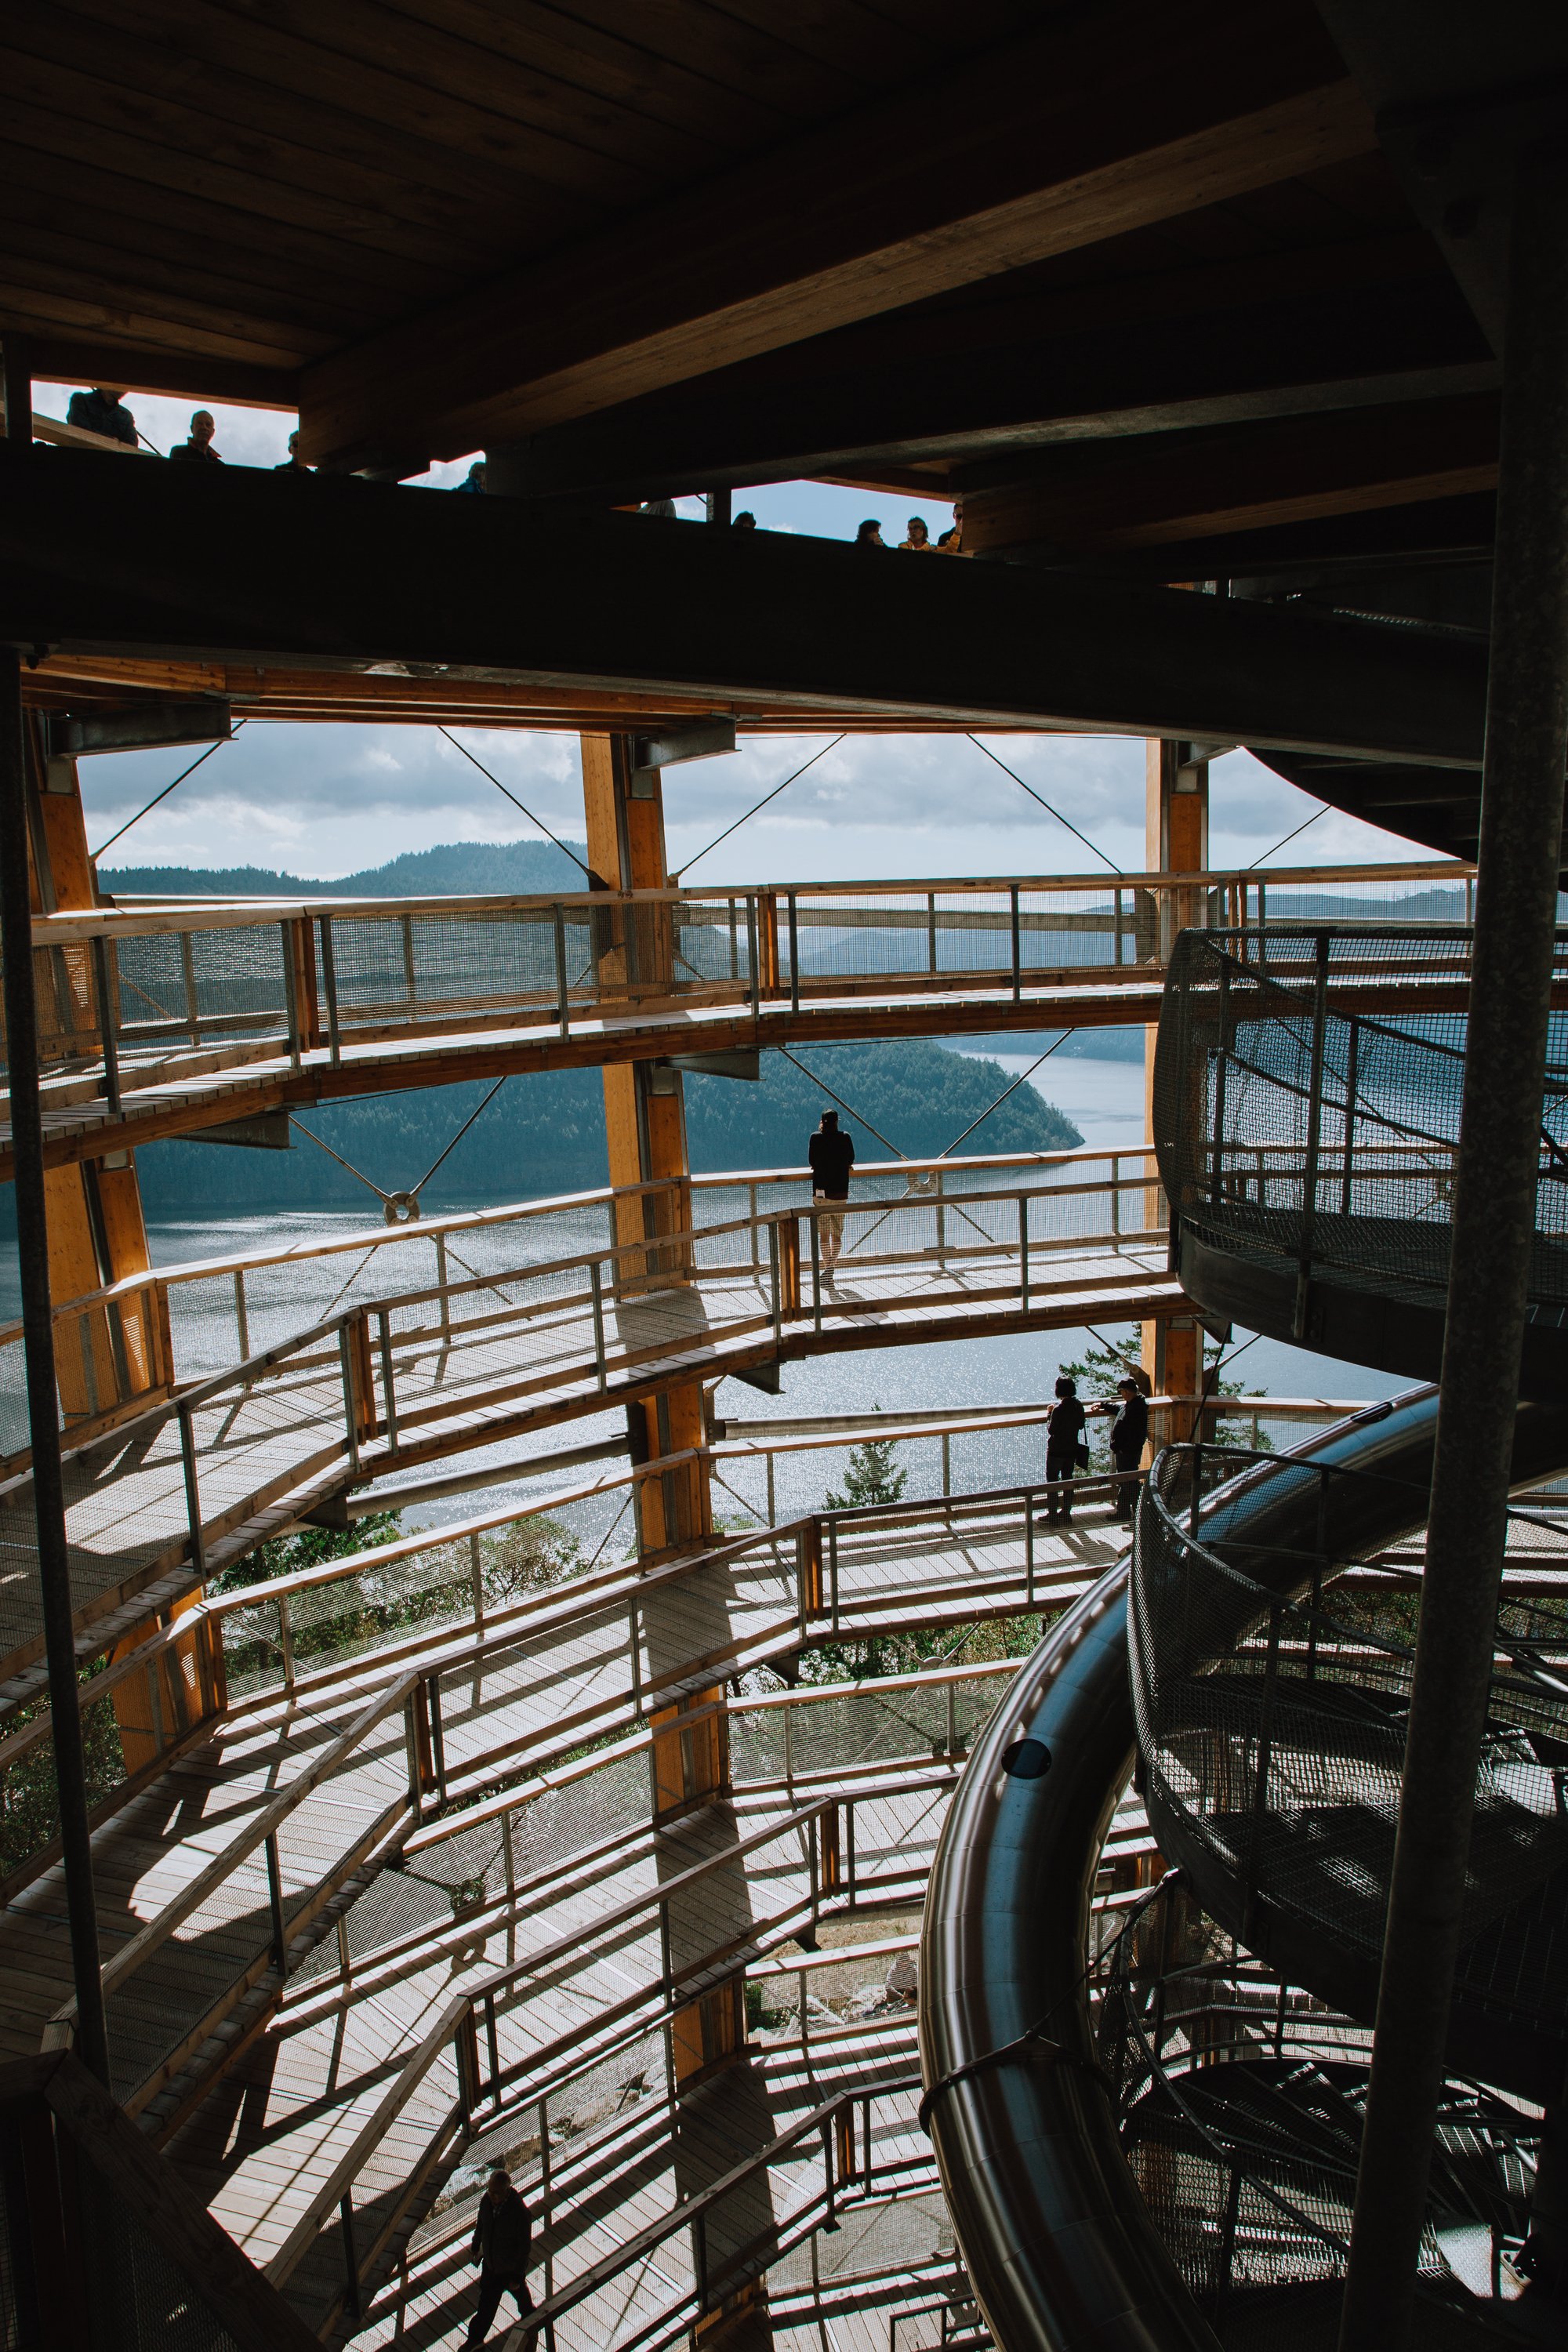 A view from the inside of a massive spiraling ramp that leads to a viewpoint over the ocean and the islands off Vancouver Island